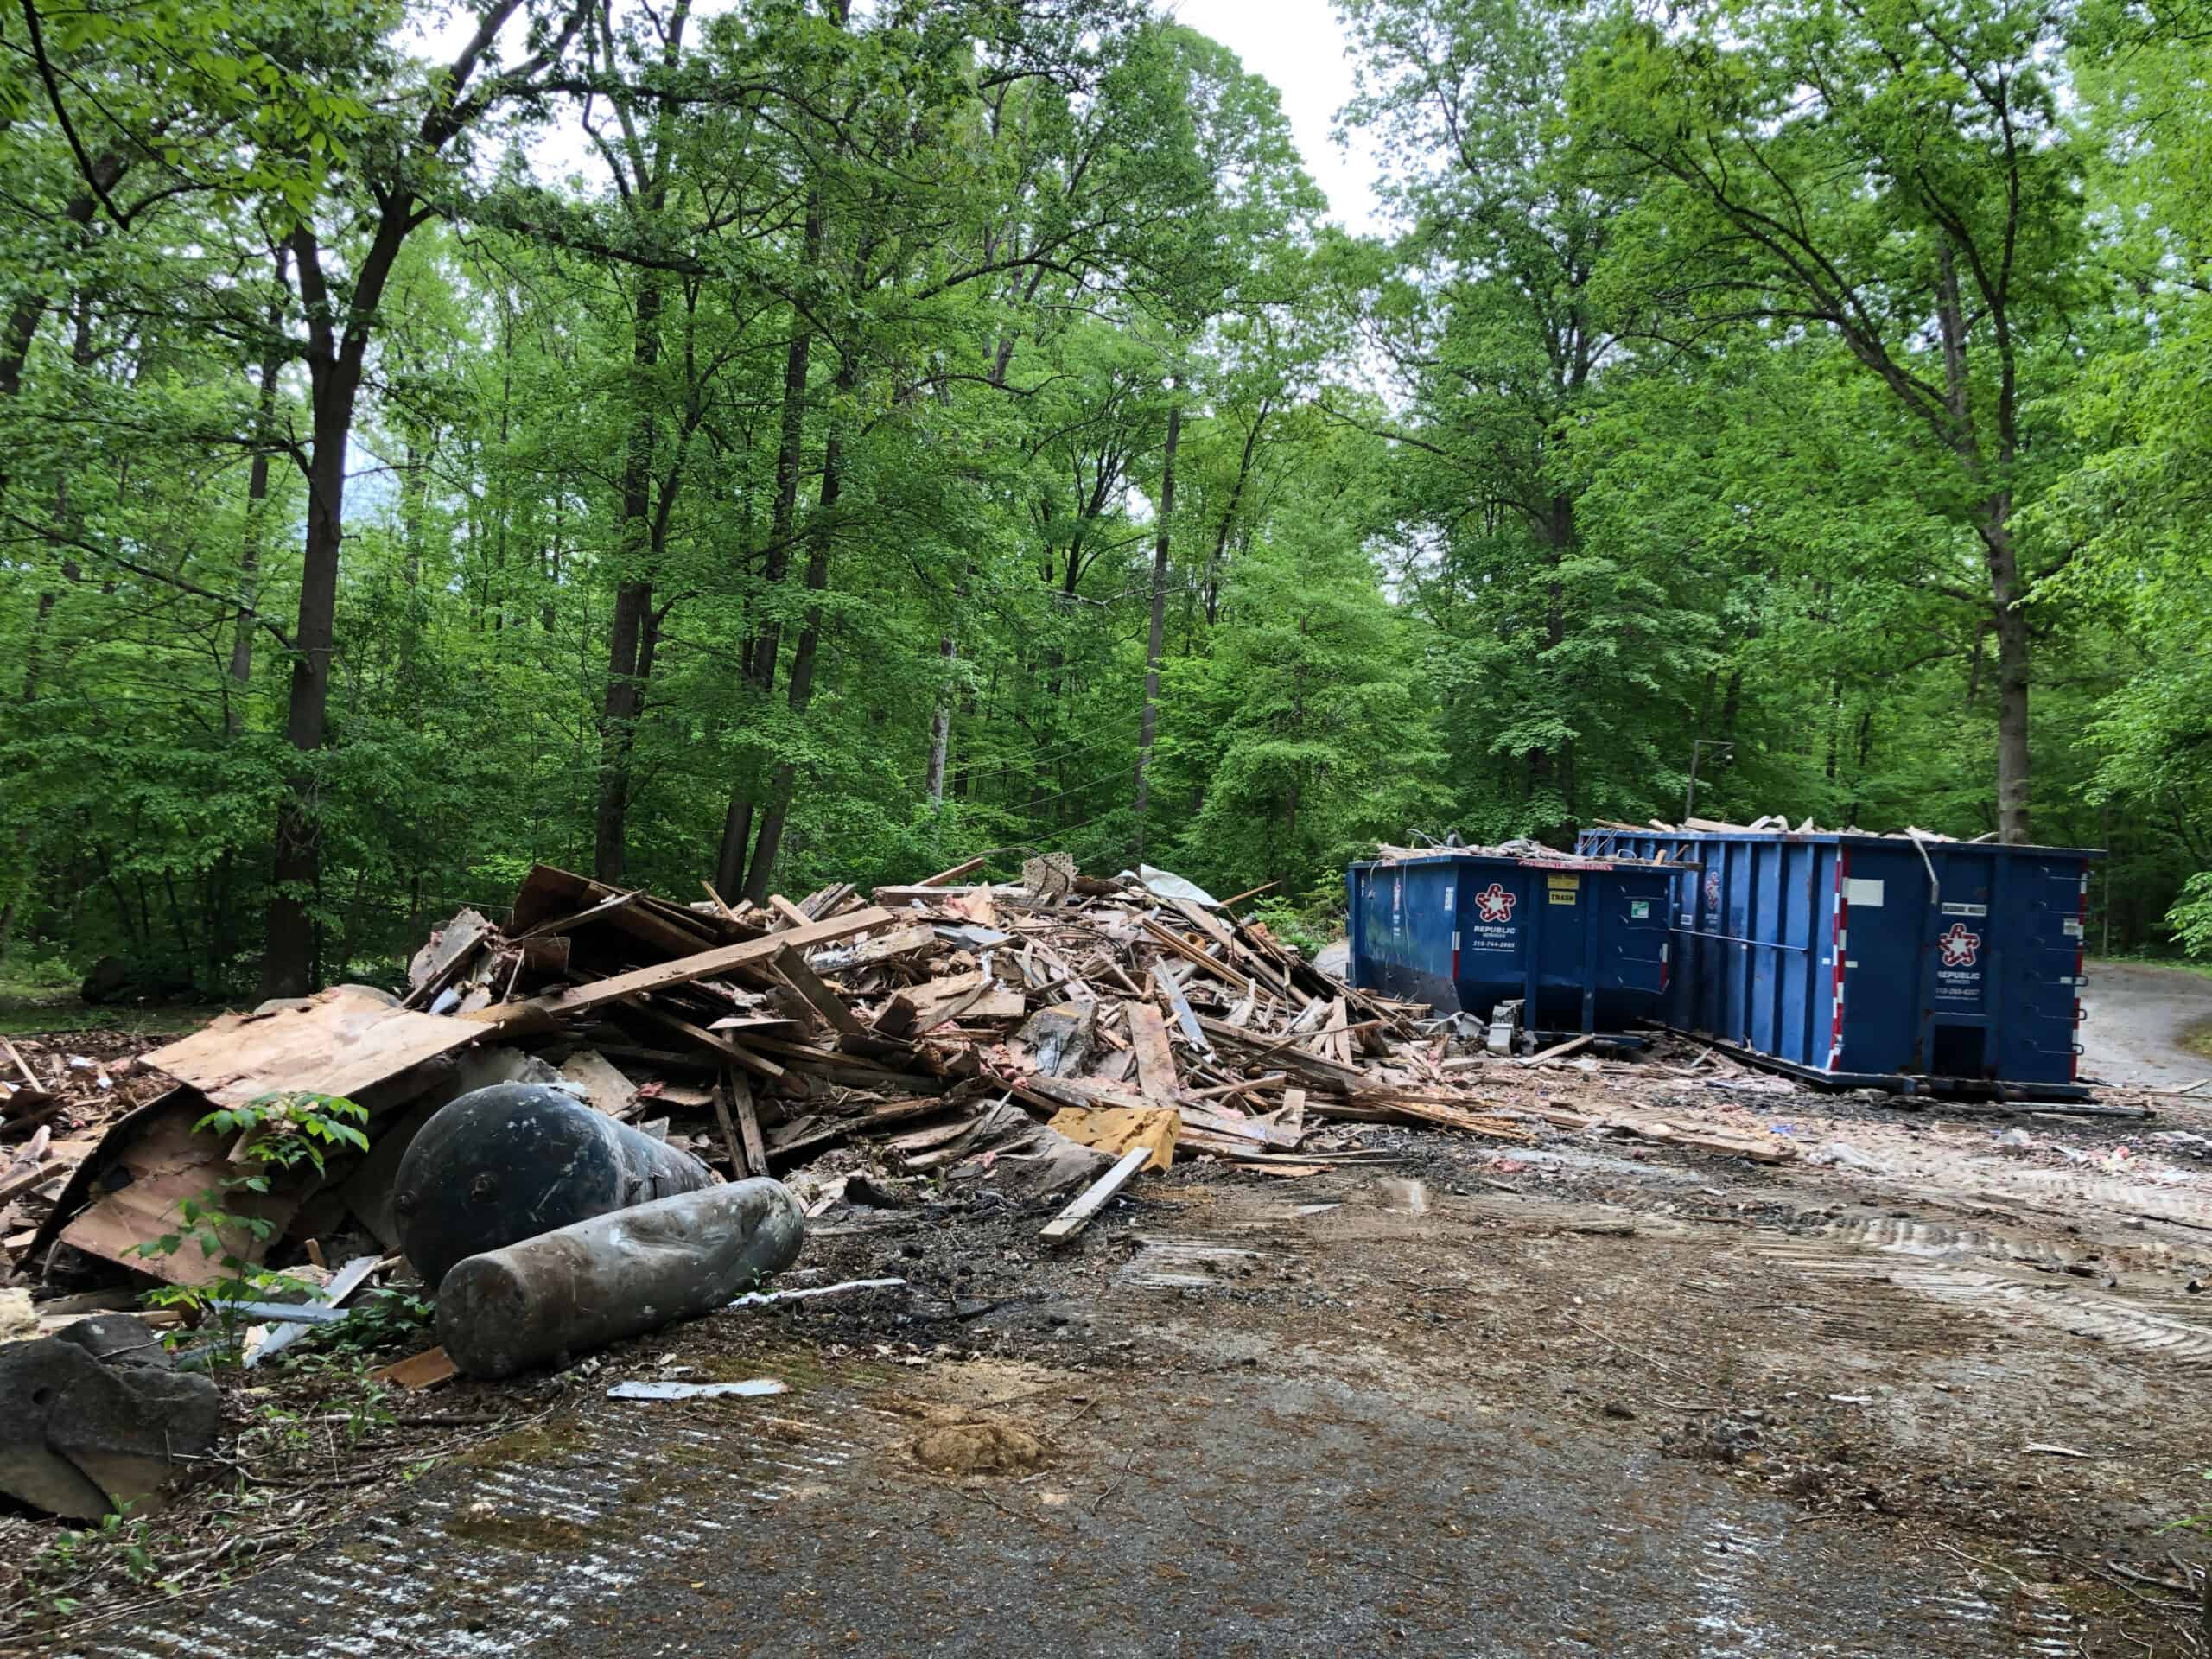 Debris from a building demolition in the woods